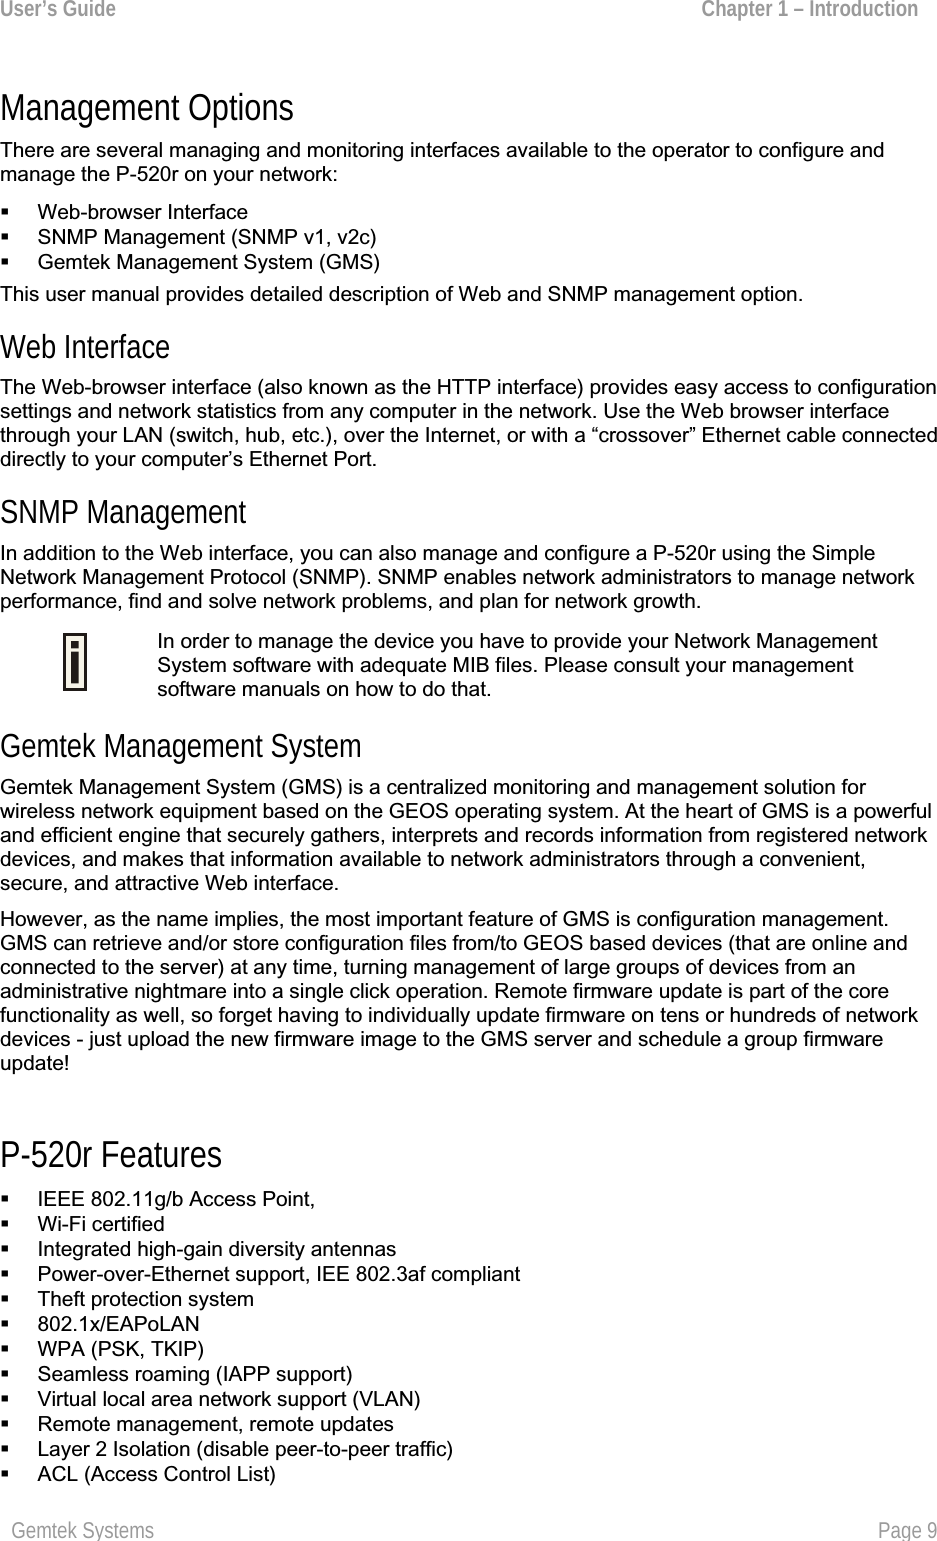 User’s Guide  Chapter 1 – Introduction Management Options There are several managing and monitoring interfaces available to the operator to configure andmanage the P-520r on your network:  Web-browser InterfaceSNMP Management (SNMP v1, v2c)Gemtek Management System (GMS)This user manual provides detailed description of Web and SNMP management option. Web Interface The Web-browser interface (also known as the HTTP interface) provides easy access to configurationsettings and network statistics from any computer in the network. Use the Web browser interfacethrough your LAN (switch, hub, etc.), over the Internet, or with a “crossover” Ethernet cable connecteddirectly to your computer’s Ethernet Port.SNMP Management In addition to the Web interface, you can also manage and configure a P-520r using the Simple Network Management Protocol (SNMP). SNMP enables network administrators to manage networkperformance, find and solve network problems, and plan for network growth.In order to manage the device you have to provide your Network ManagementSystem software with adequate MIB files. Please consult your managementsoftware manuals on how to do that. Gemtek Management SystemGemtek Management System (GMS) is a centralized monitoring and management solution for wireless network equipment based on the GEOS operating system. At the heart of GMS is a powerfuland efficient engine that securely gathers, interprets and records information from registered network devices, and makes that information available to network administrators through a convenient,secure, and attractive Web interface.However, as the name implies, the most important feature of GMS is configuration management.GMS can retrieve and/or store configuration files from/to GEOS based devices (that are online and connected to the server) at any time, turning management of large groups of devices from an administrative nightmare into a single click operation. Remote firmware update is part of the core functionality as well, so forget having to individually update firmware on tens or hundreds of networkdevices - just upload the new firmware image to the GMS server and schedule a group firmwareupdate!P-520r Features IEEE 802.11g/b Access Point, Wi-Fi certifiedIntegrated high-gain diversity antennas Power-over-Ethernet support, IEE 802.3af compliant Theft protection system 802.1x/EAPoLAN WPA (PSK, TKIP) Seamless roaming (IAPP support) Virtual local area network support (VLAN) Remote management, remote updatesLayer 2 Isolation (disable peer-to-peer traffic) ACL (Access Control List)Gemtek Systems Page 9